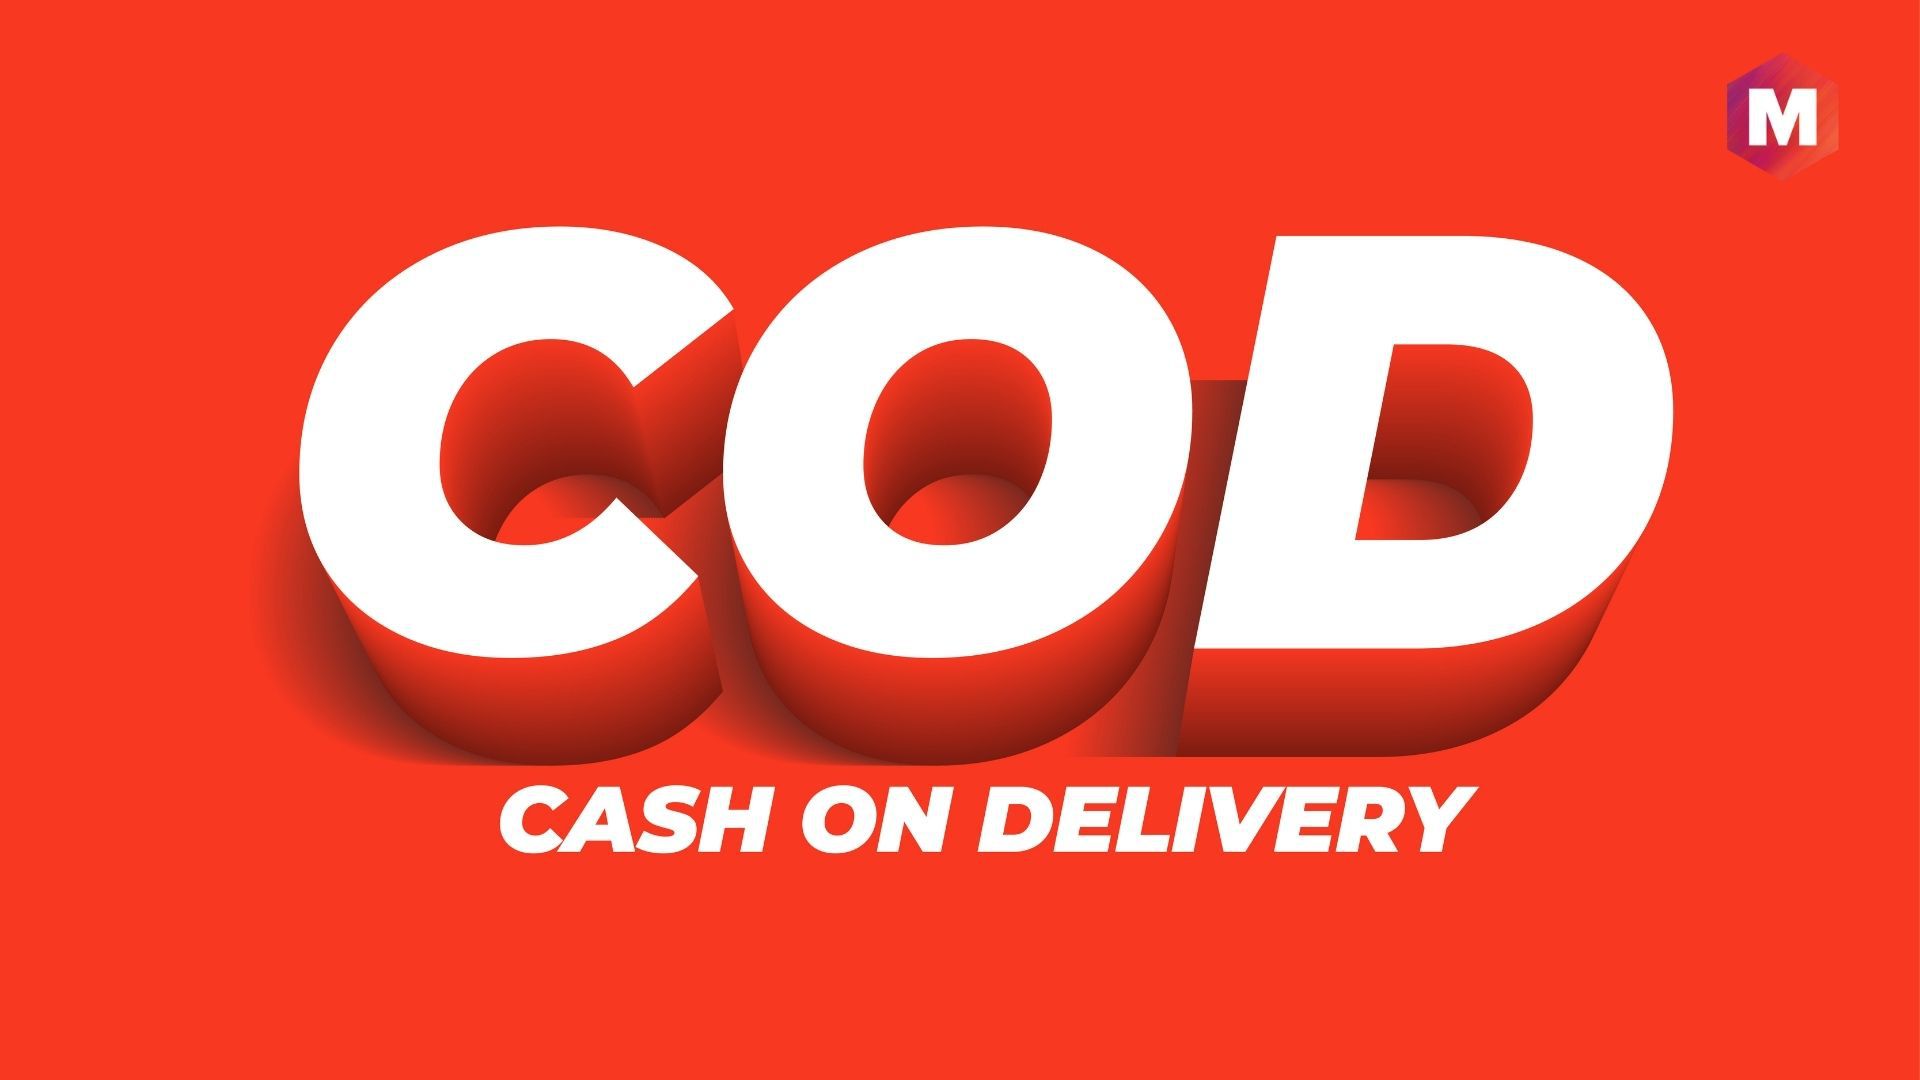 Cash on Delivery (COD) Definition - Examples, Pros and Cons | Marketing91